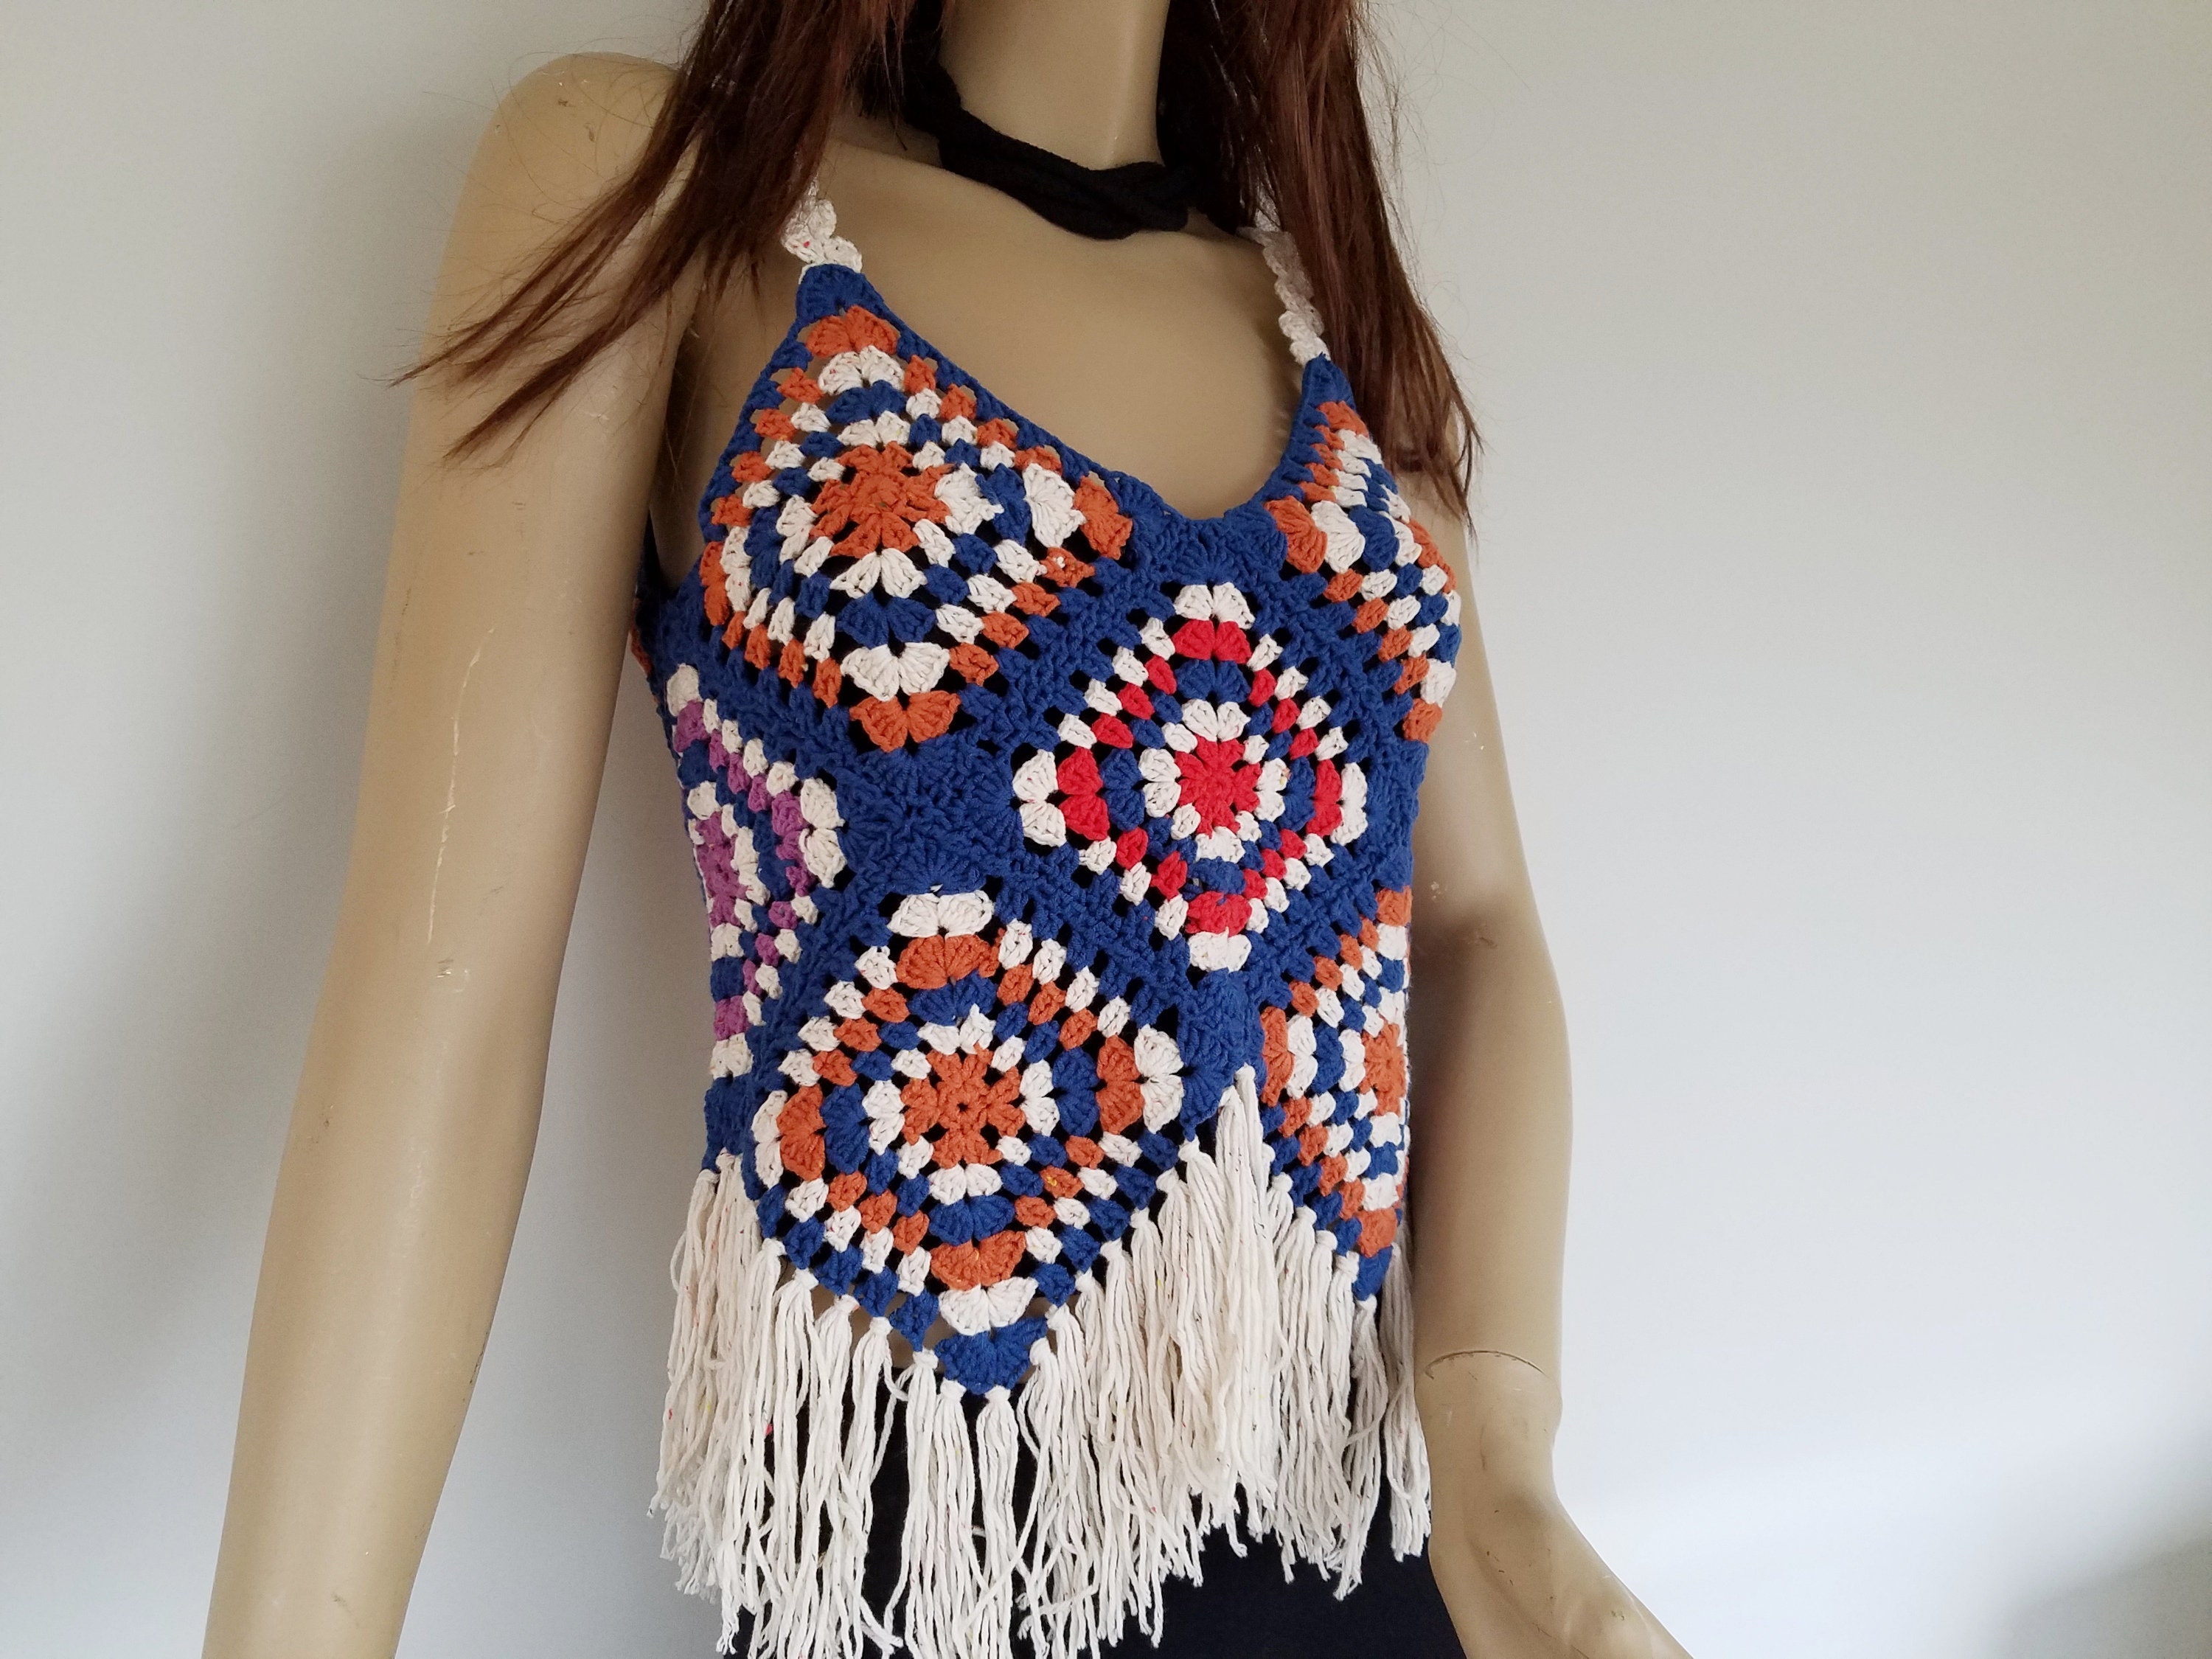 Granny Square Crochet Tank Top with Fringe Detail | Etsy